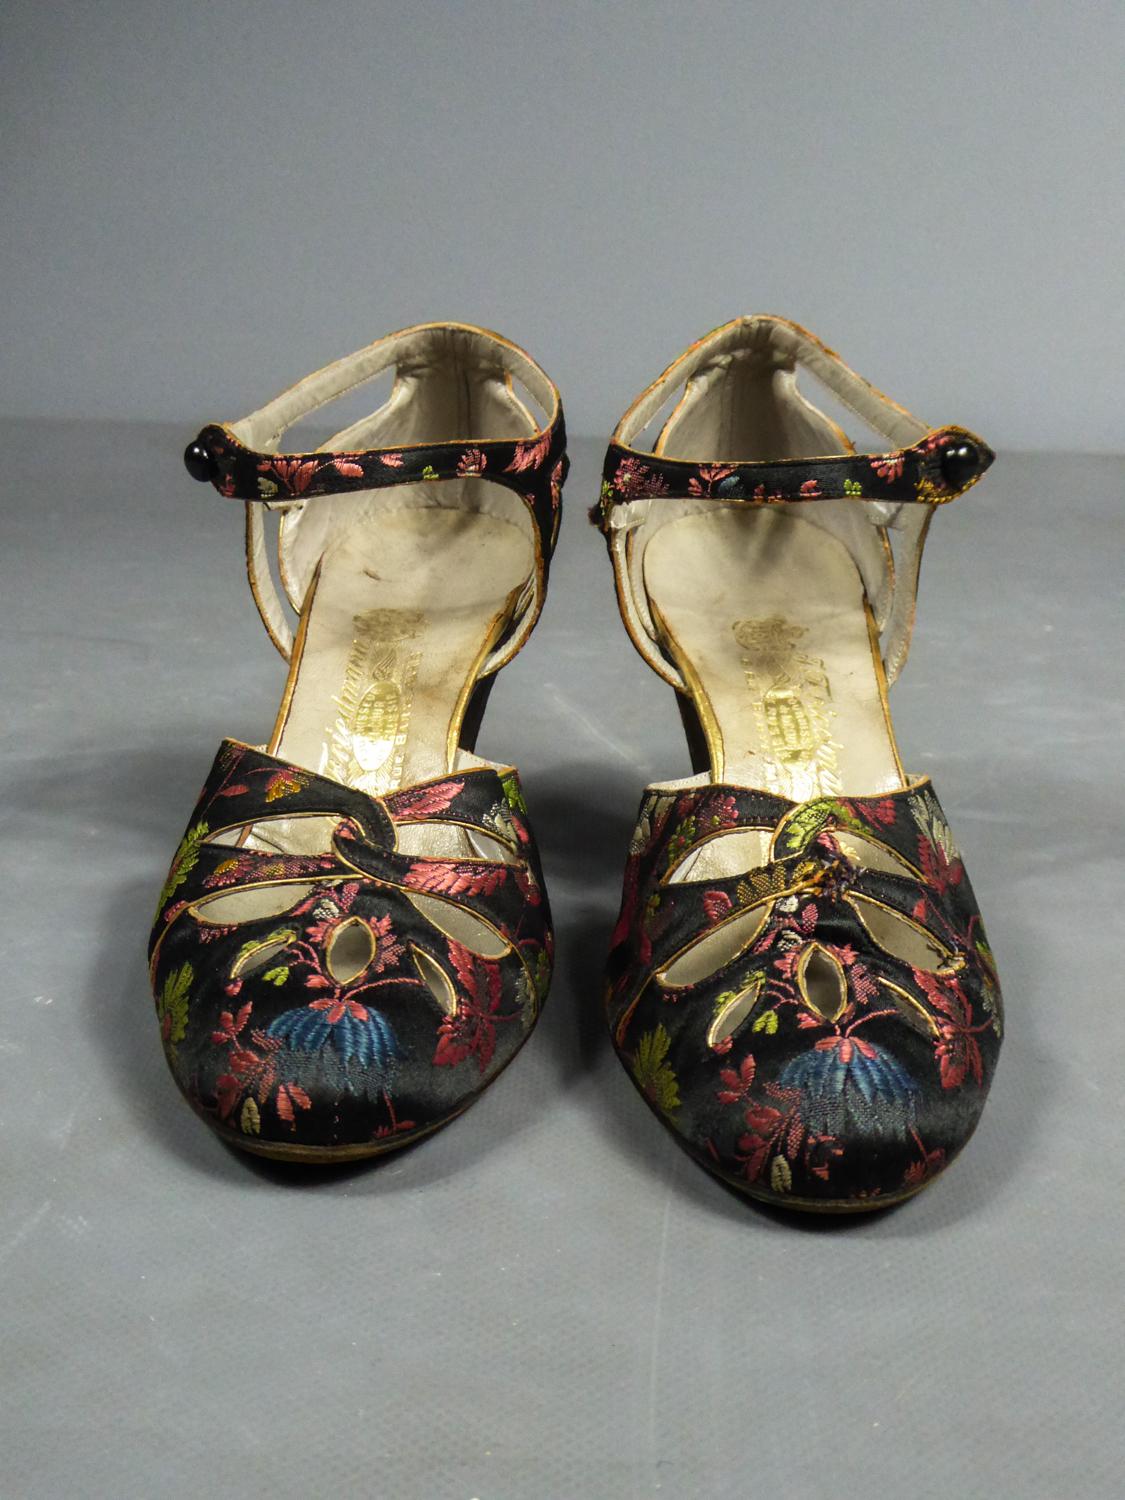 Circa 1915/1920
France

A Collecting Pair of Salomé or pumps for ball in brocaded satin from the designer house Friedmann circa 1915/1920. Located at 6 rue Barye in Paris, the designer house Friedmann works for Haute Couture and is notably a